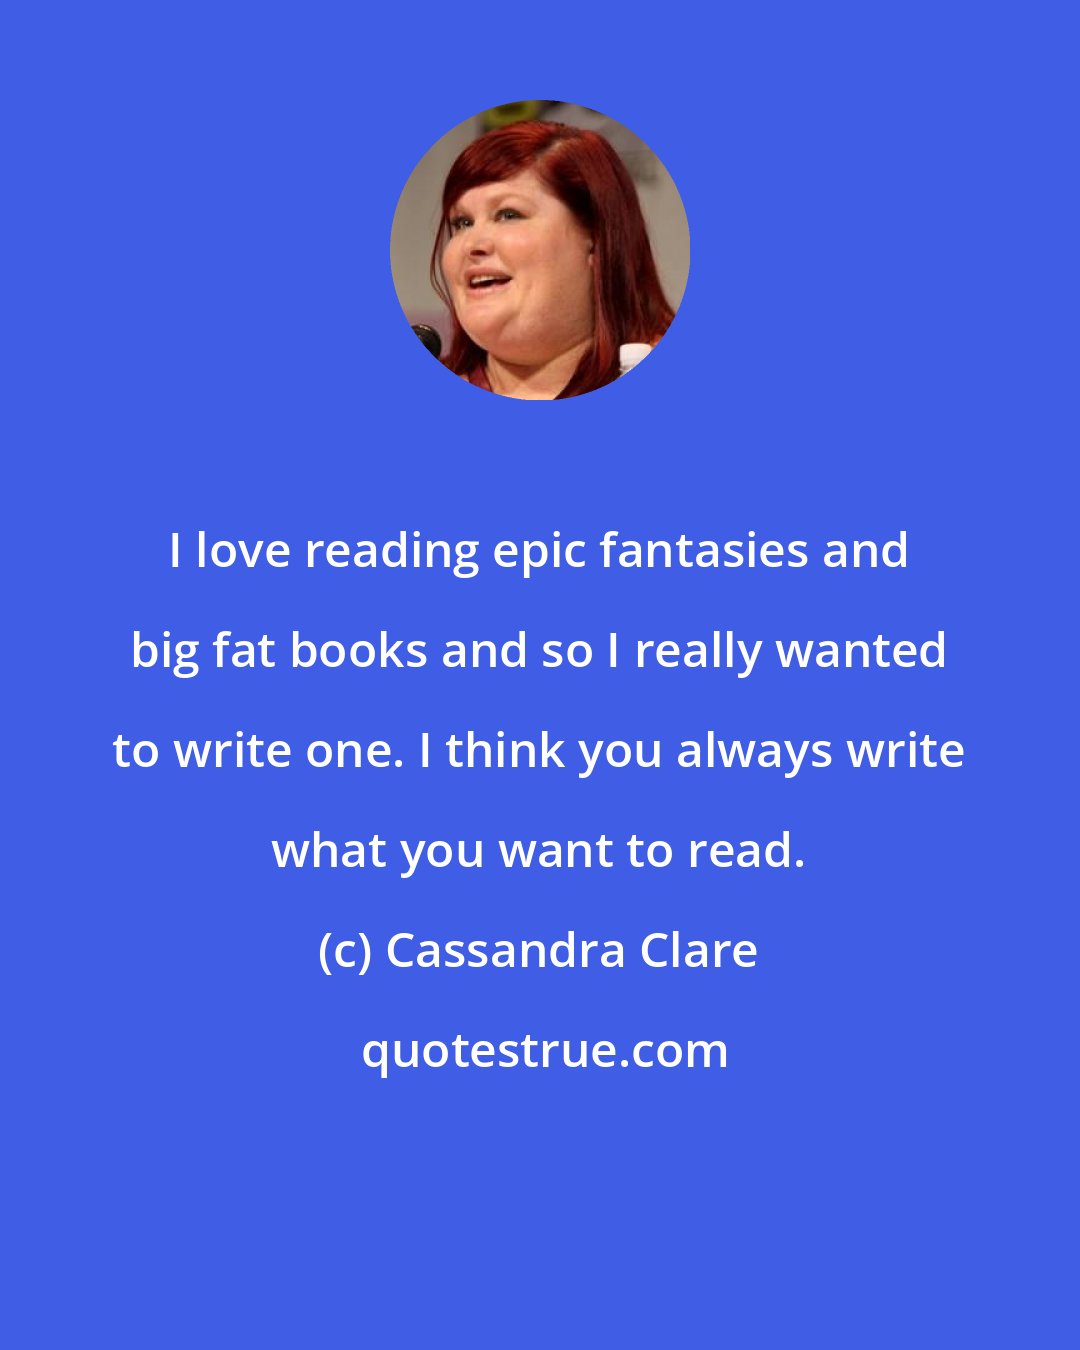 Cassandra Clare: I love reading epic fantasies and big fat books and so I really wanted to write one. I think you always write what you want to read.